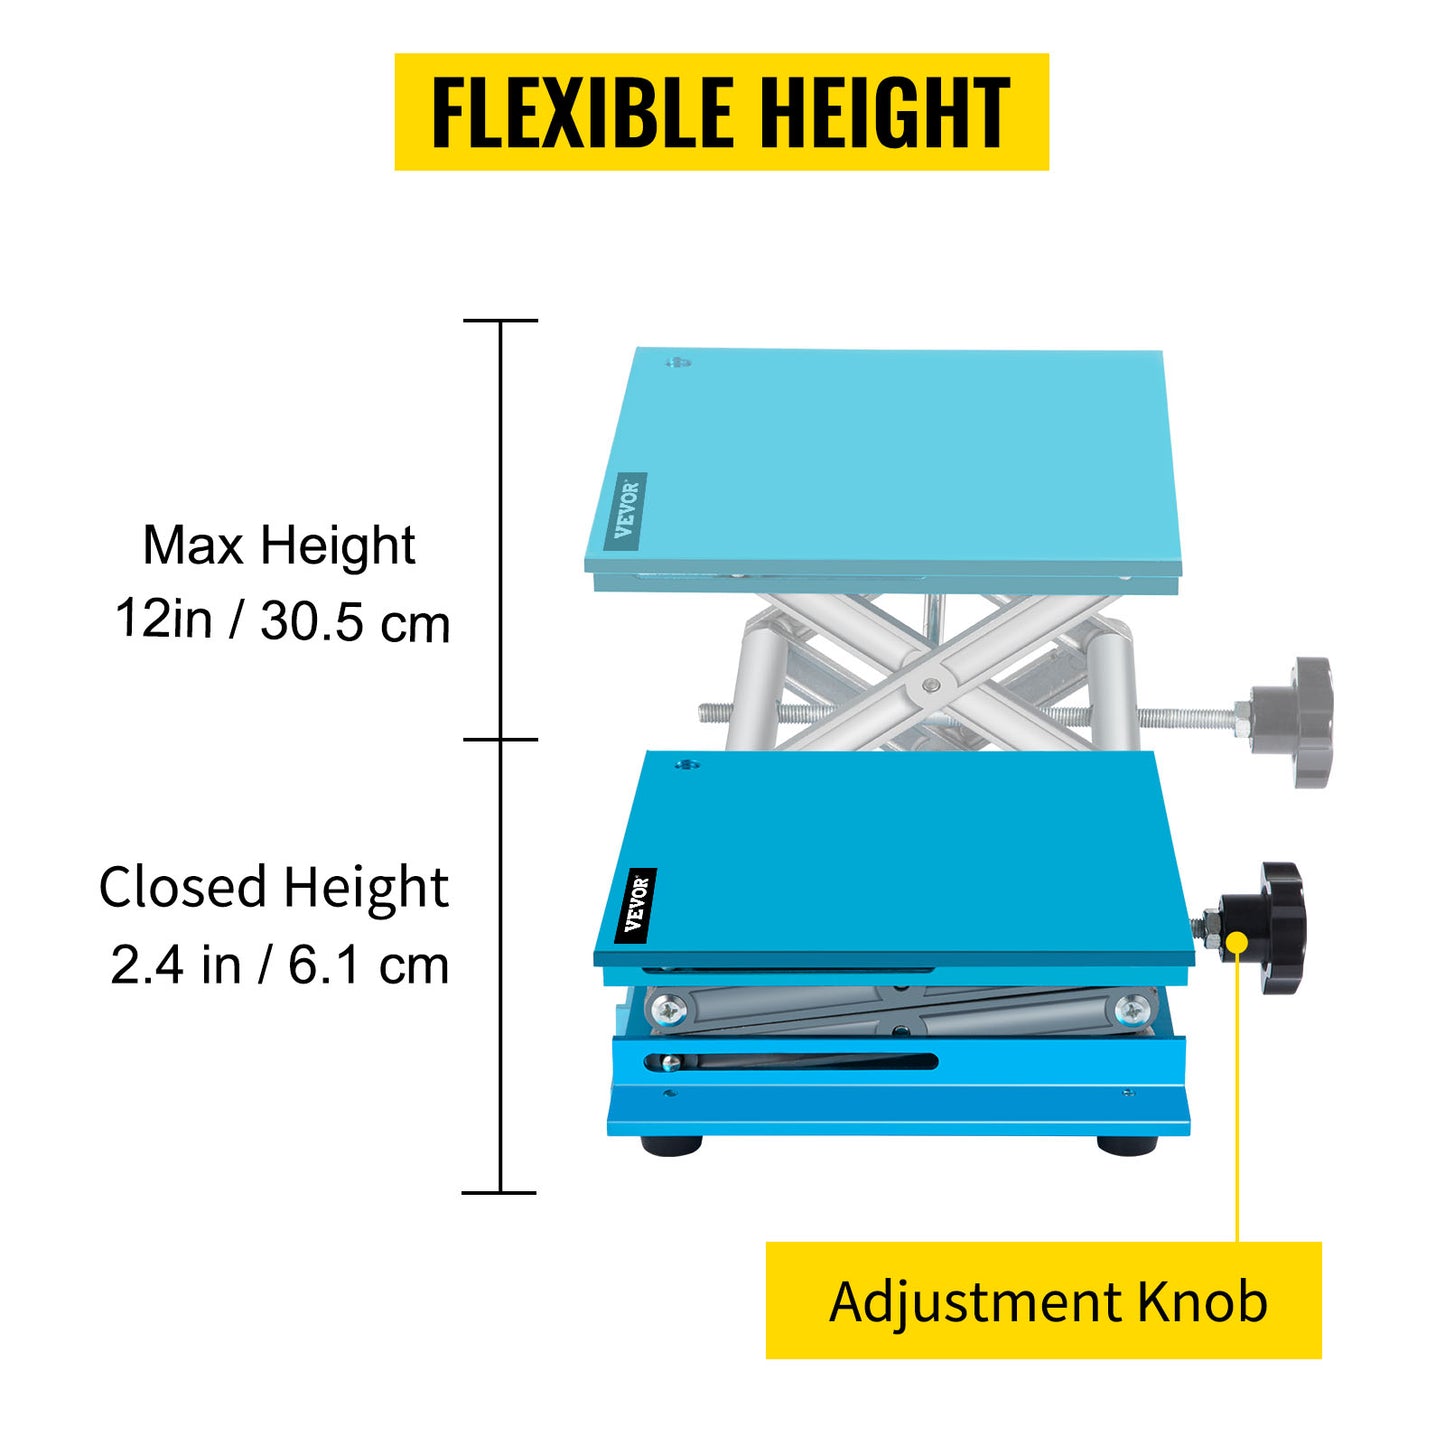 8"X8" Aluminum Laboratory Jack: Precision-Adjustable Lifter Platform for Elevated Workbench Versatility in Carpentry and Lab Settings